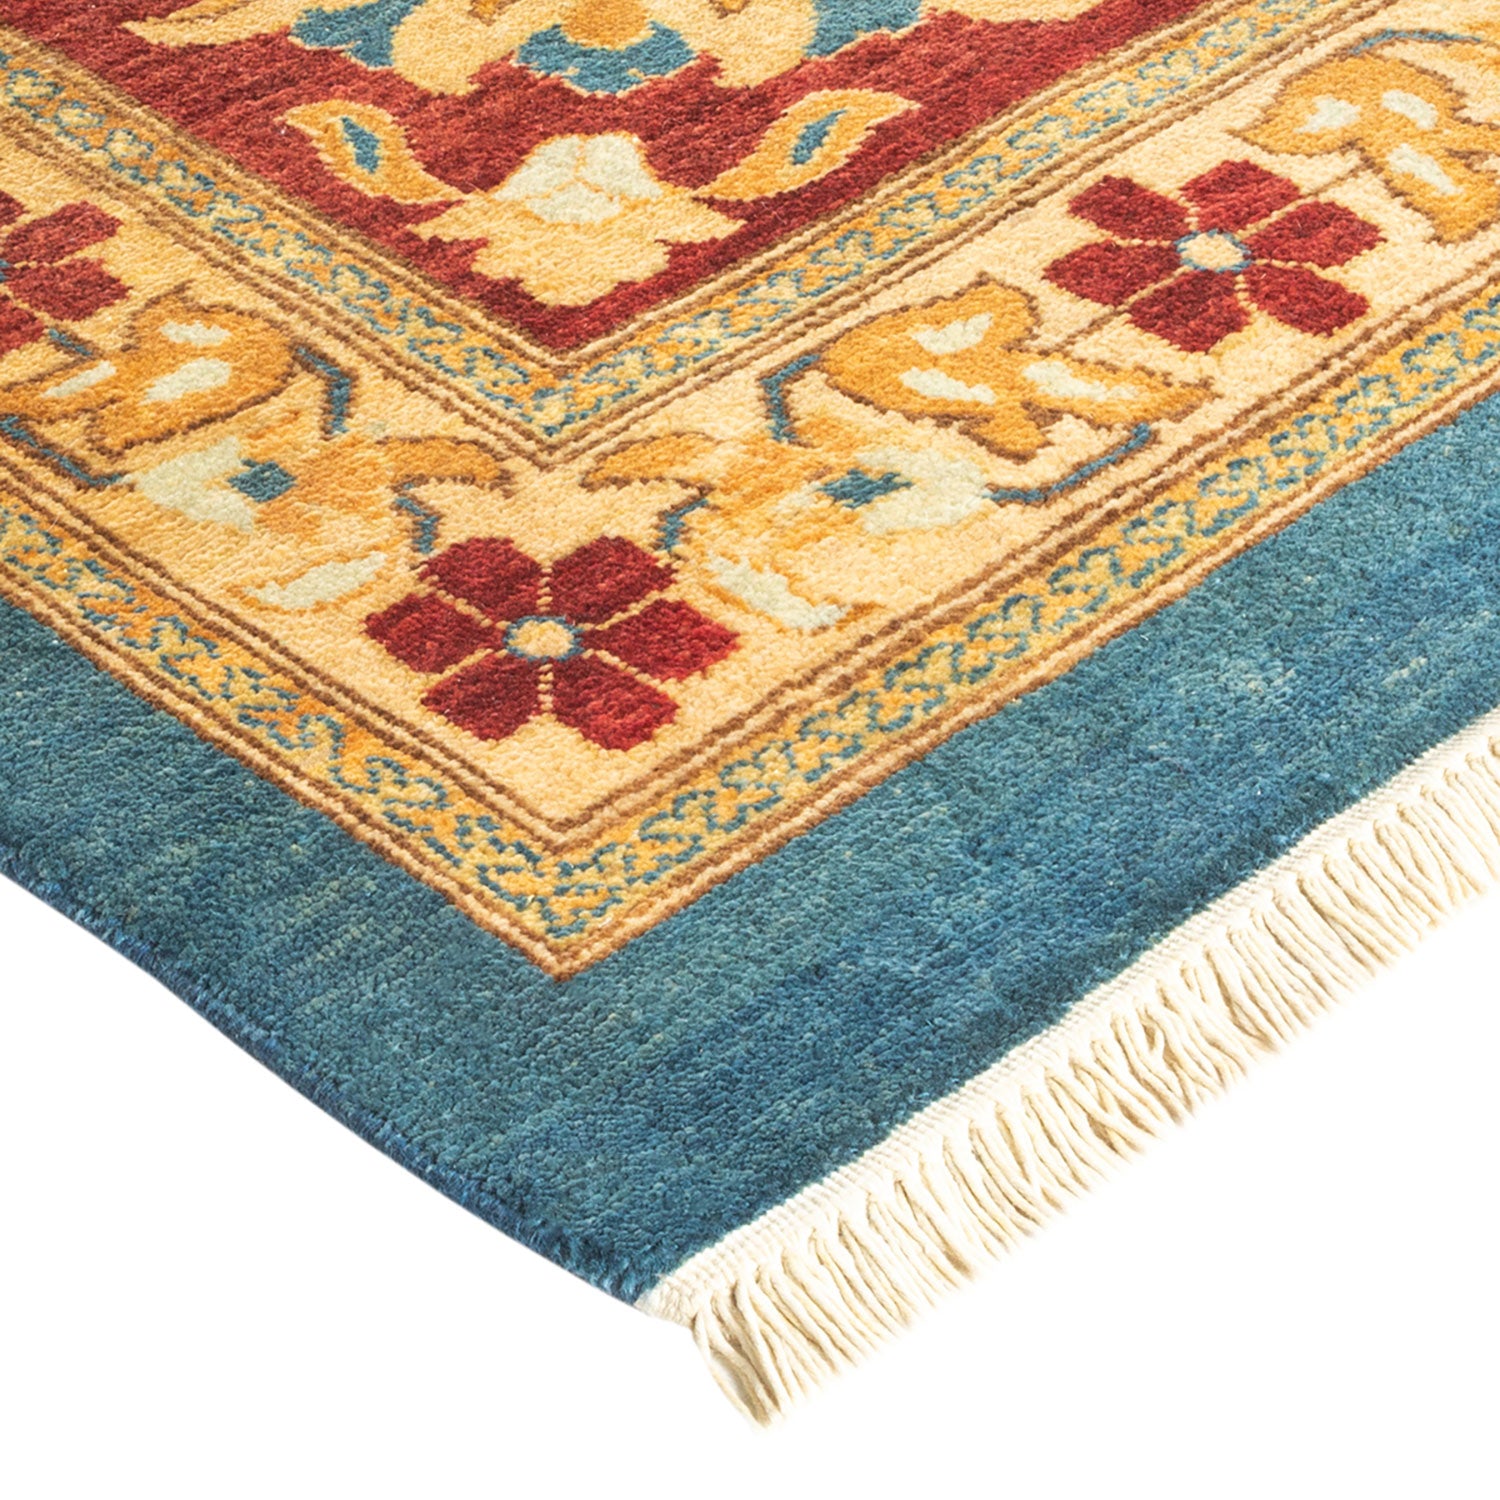 Intricately patterned traditional rug with warm color palette and fringe.